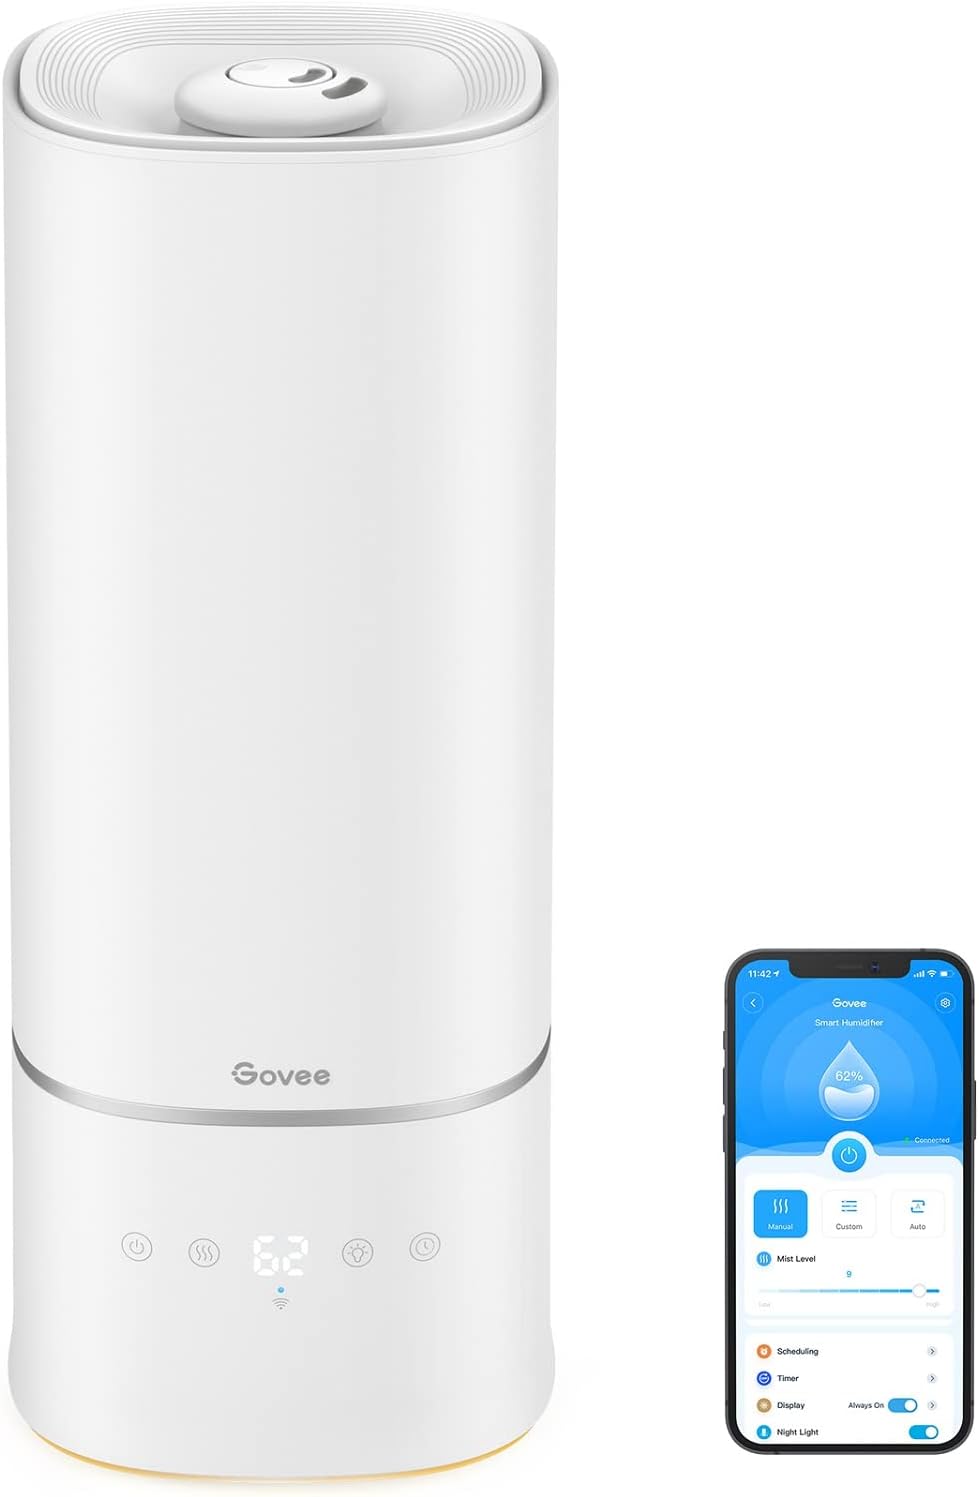 Govee 6L Smart WiFi Humidifiers for Bedroom Large Room Plants, Top Fill Cool Mist Humidifier with App Control, Auto Mode with Sensor, Essential Oil Diffusers and Night Light, Works with Alexa